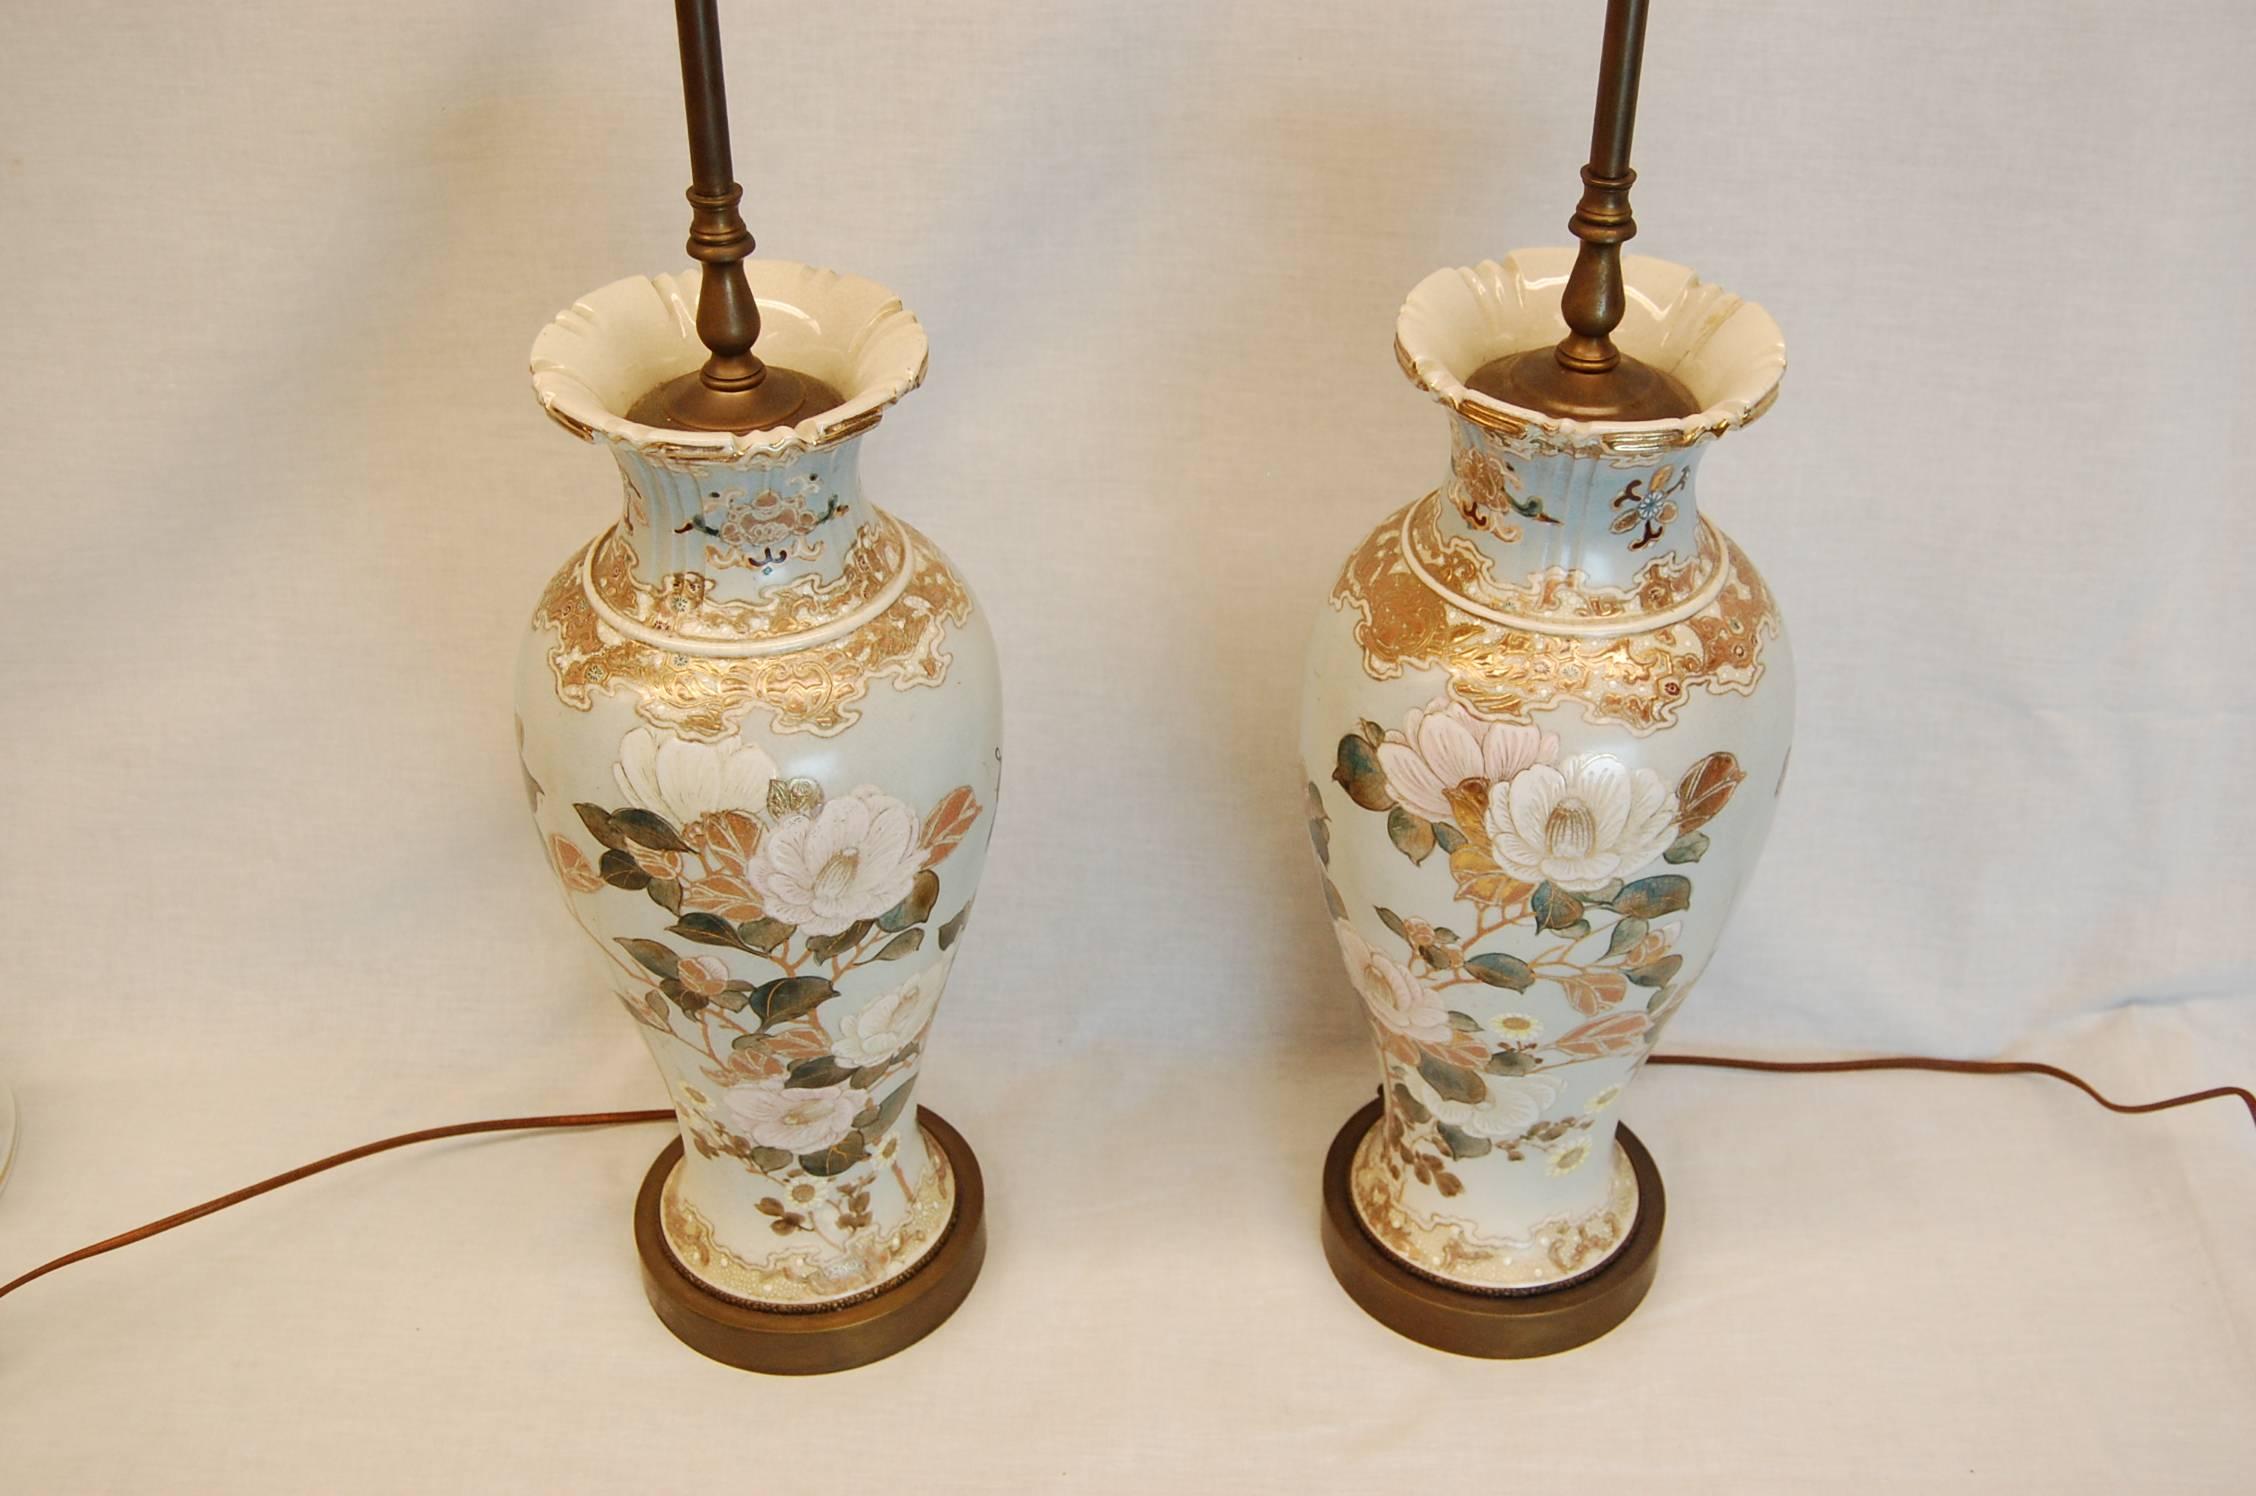 Late Victorian Pair of Floral and Gold Decorated Porcelain Vases Wired as Lamps, circa 1900